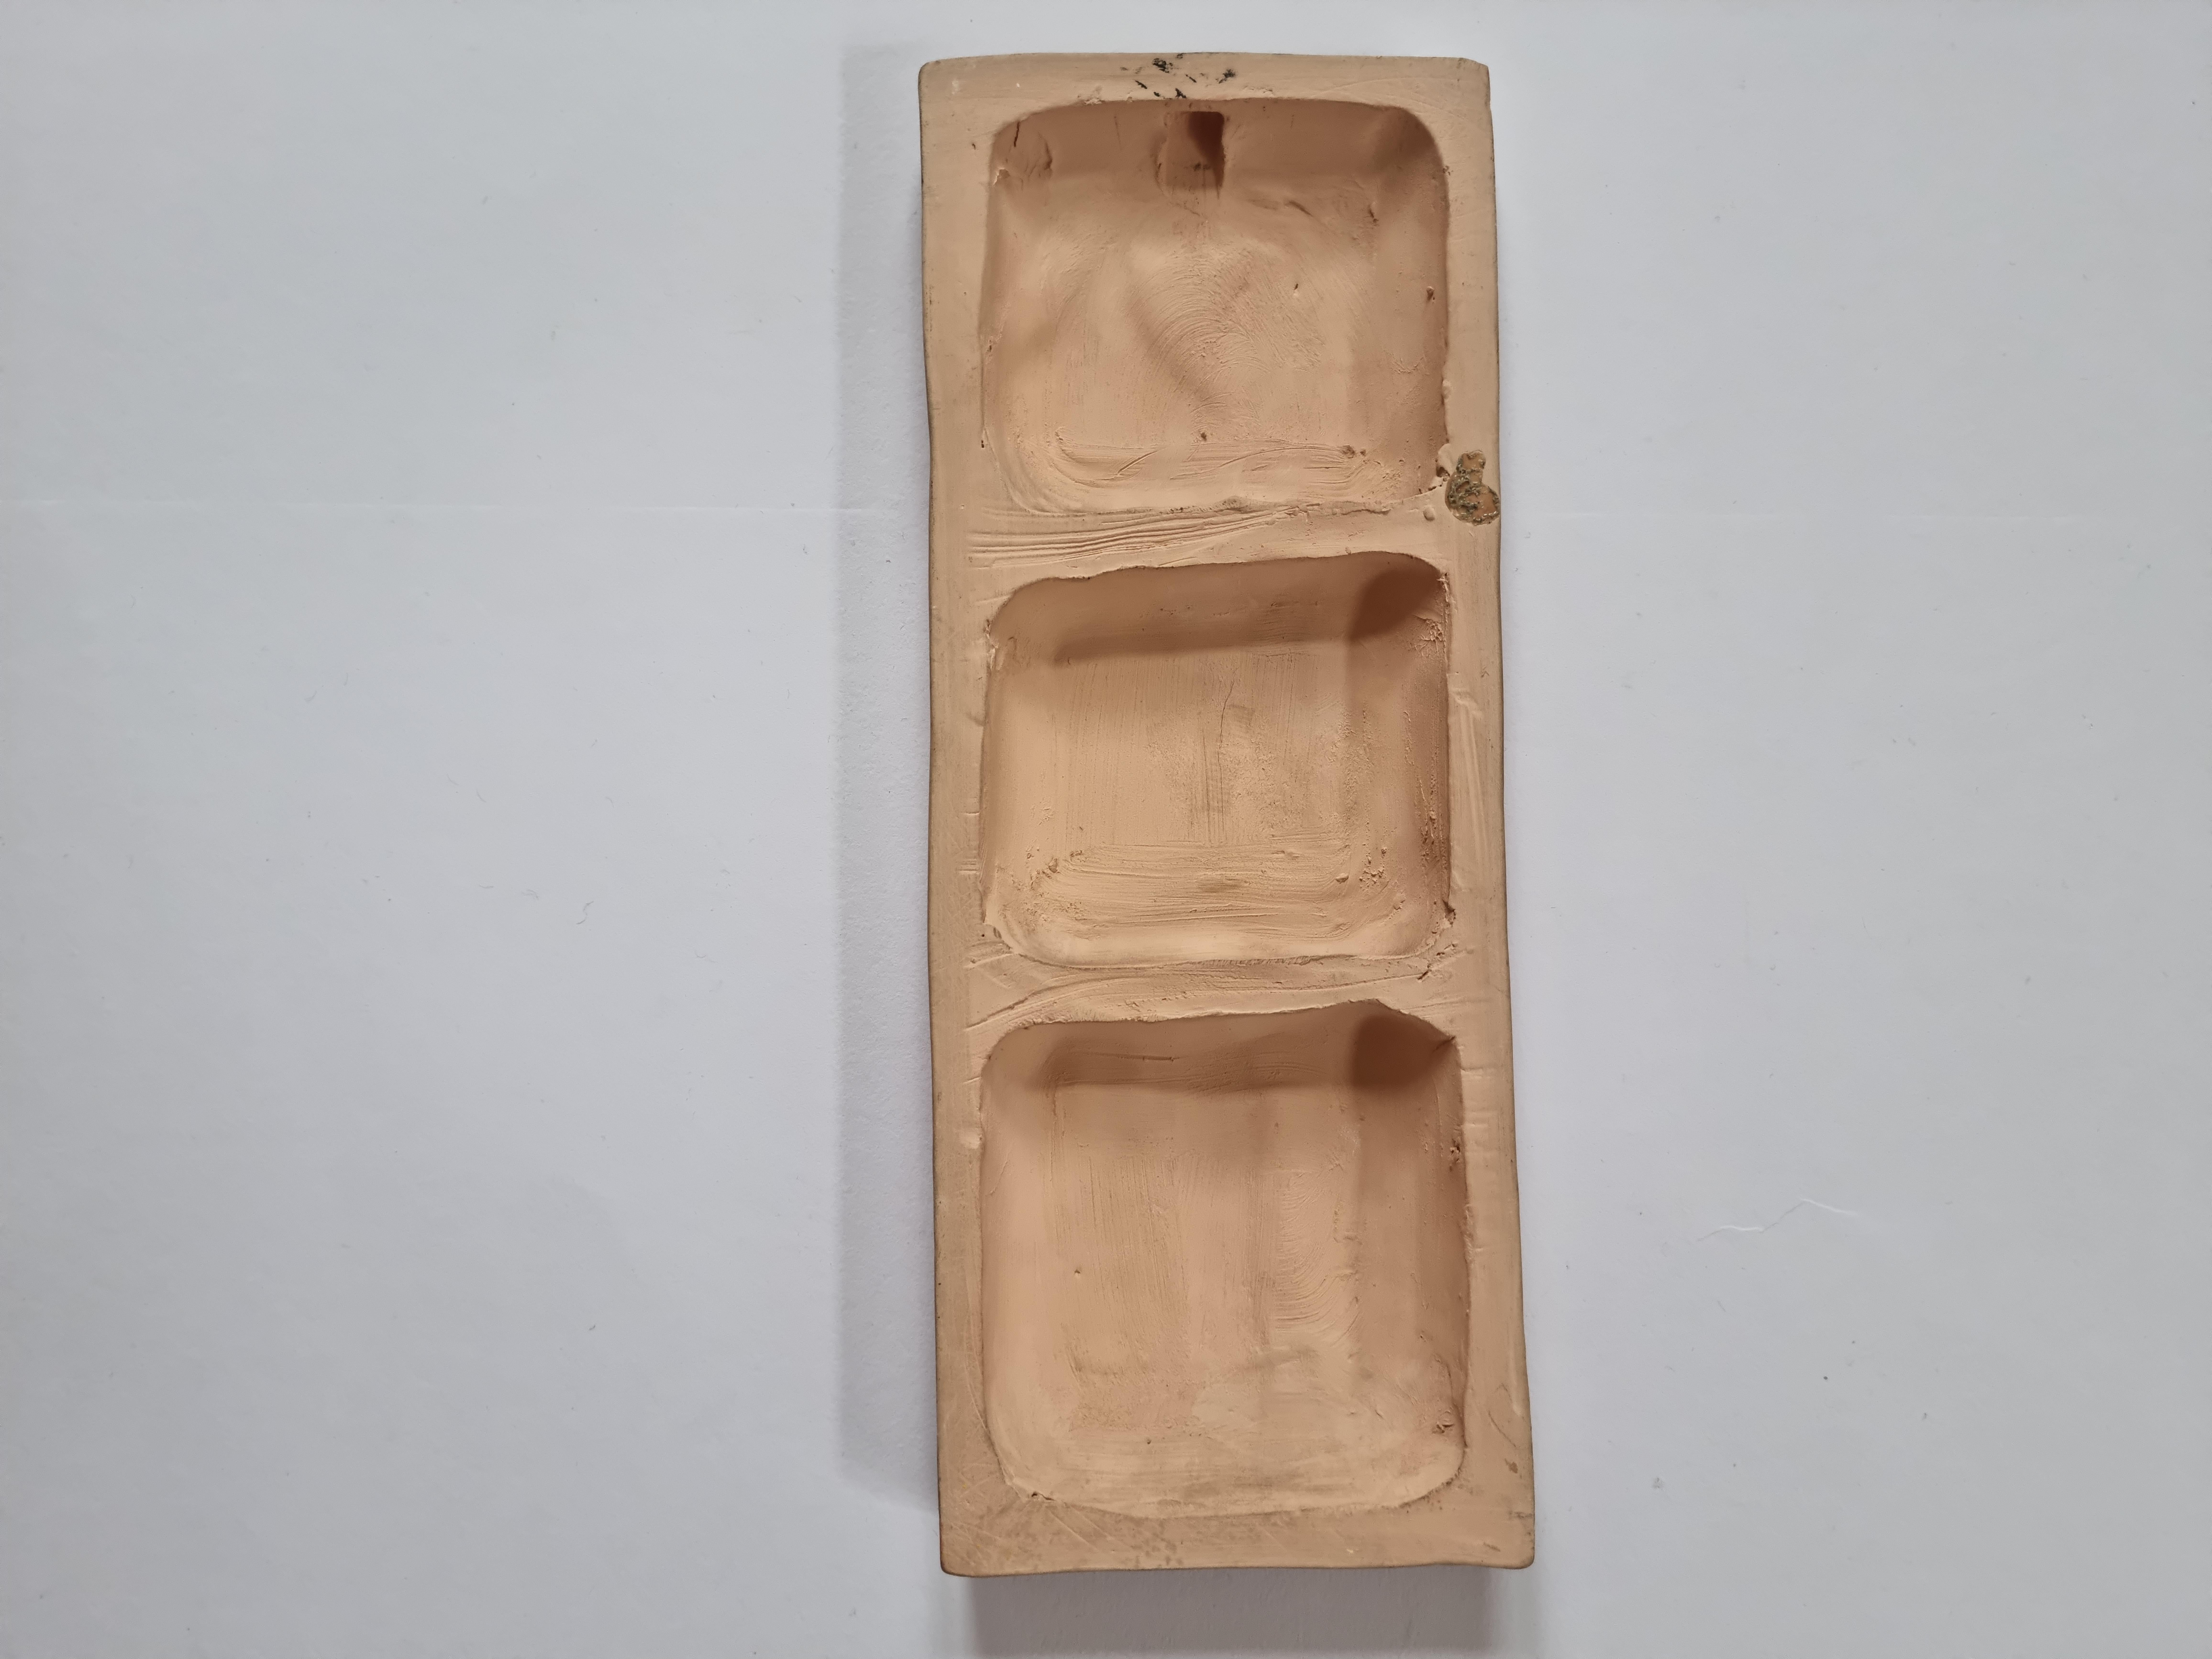 Rare Midcentury Ceramic Wall Sculpture Lovers, 1970s For Sale 2